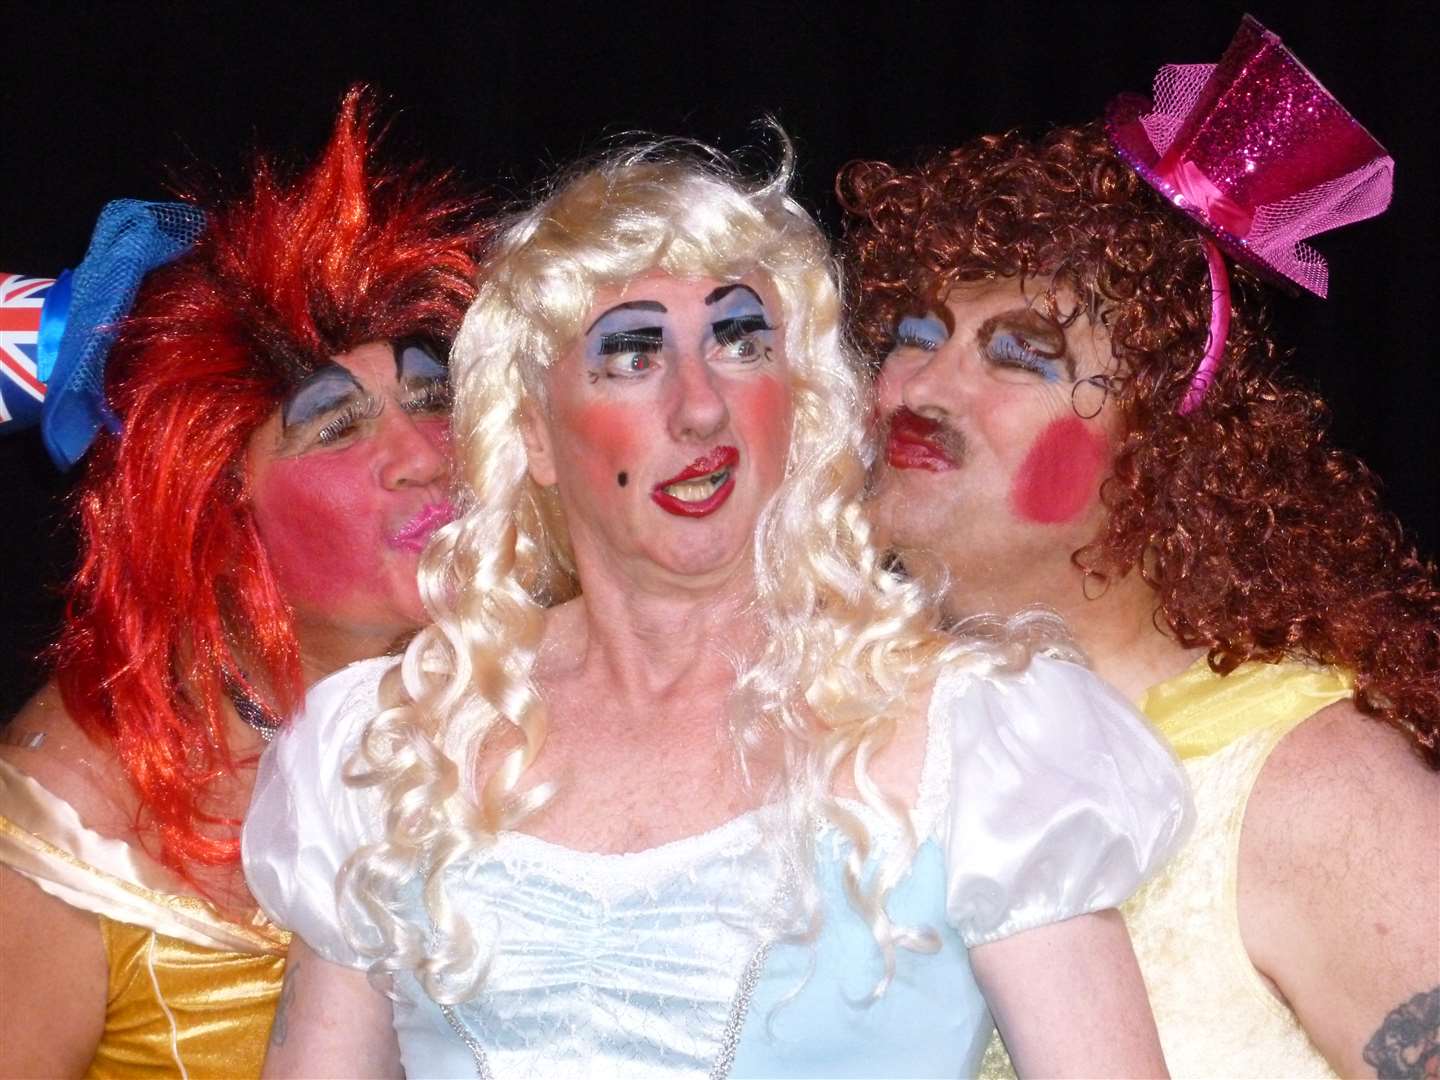 Skinderella was the Sgt's mess panto in 2014